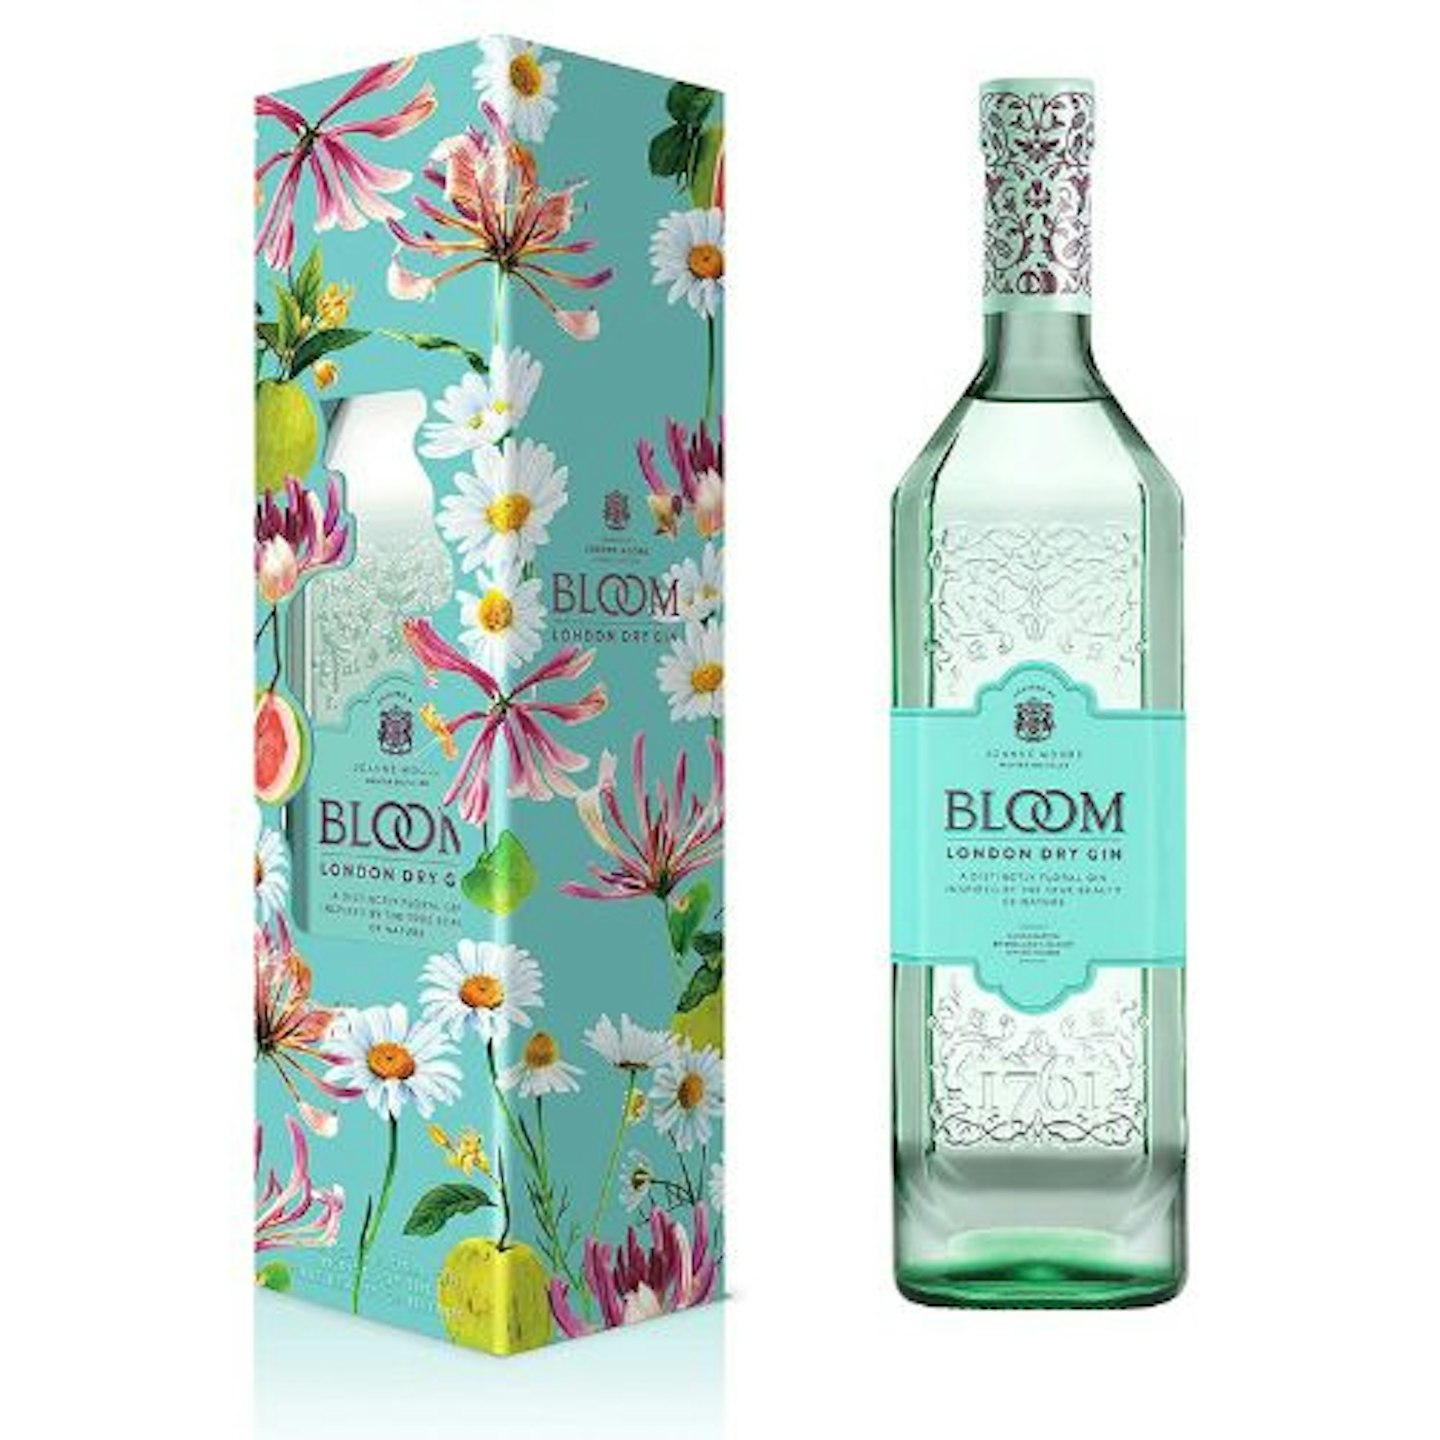 Bloom London Dry Gin and Gift Box